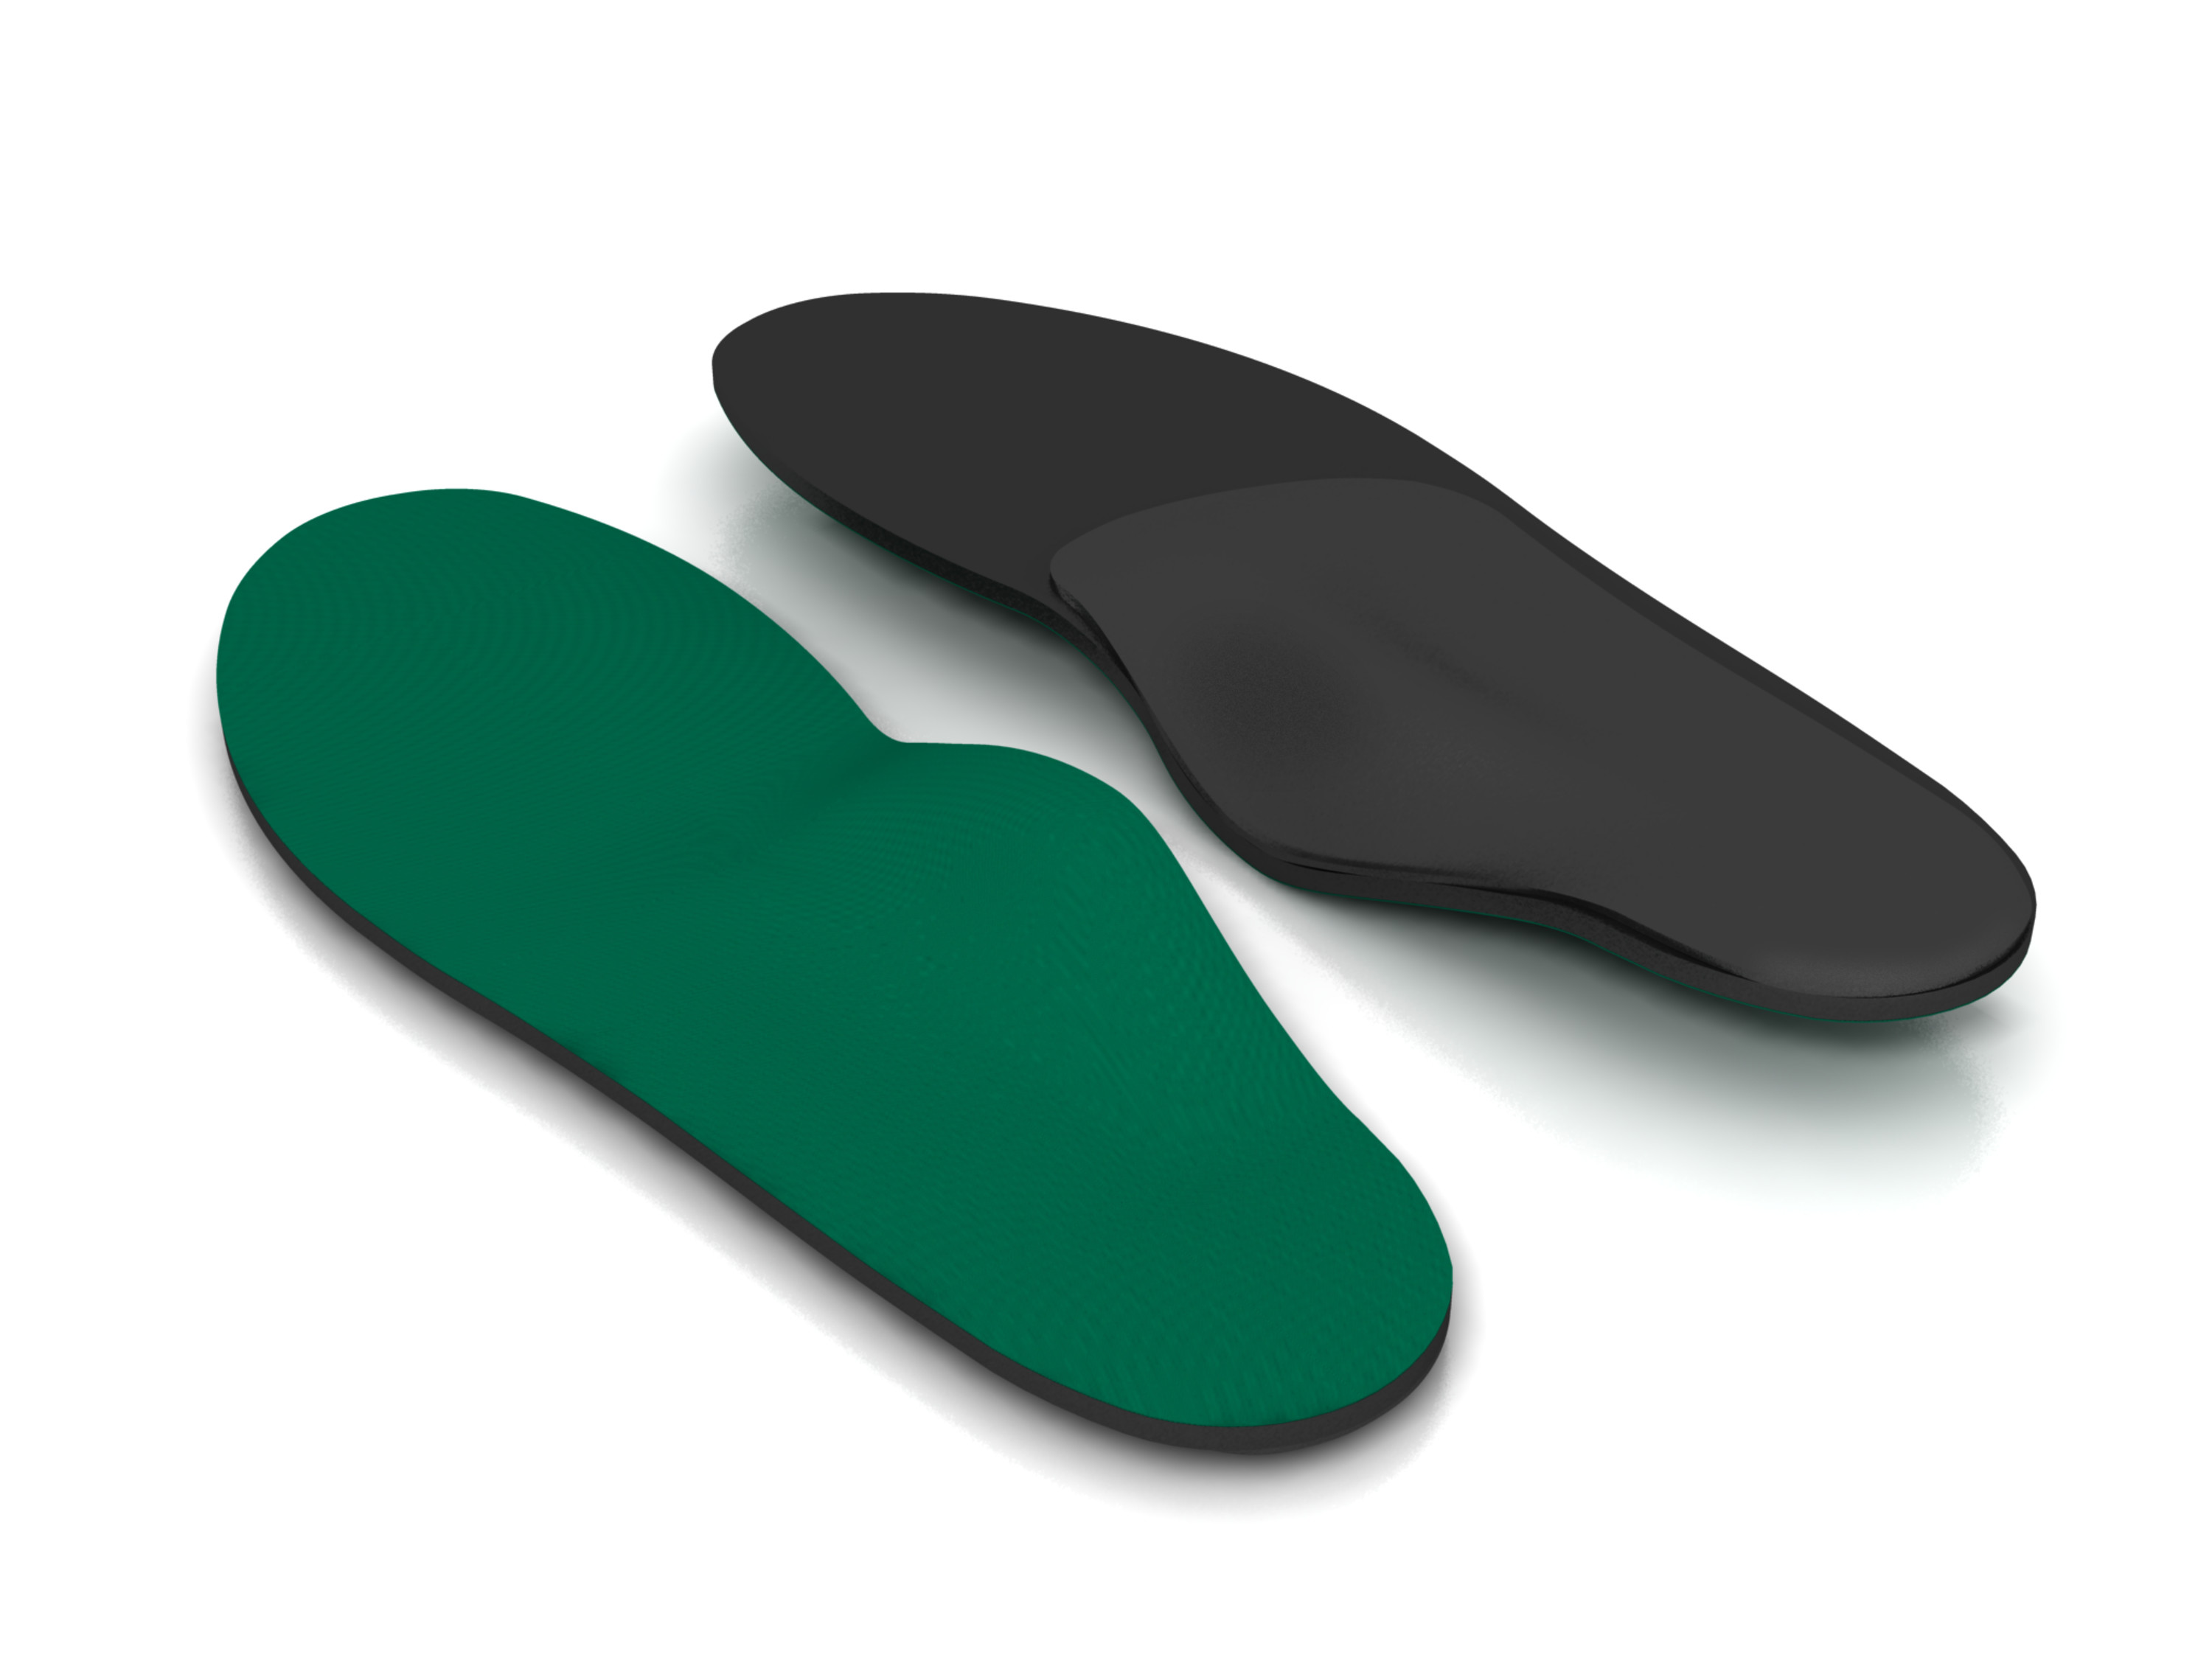 Spenco Rx Arch Cushions Insole - image 4 of 4